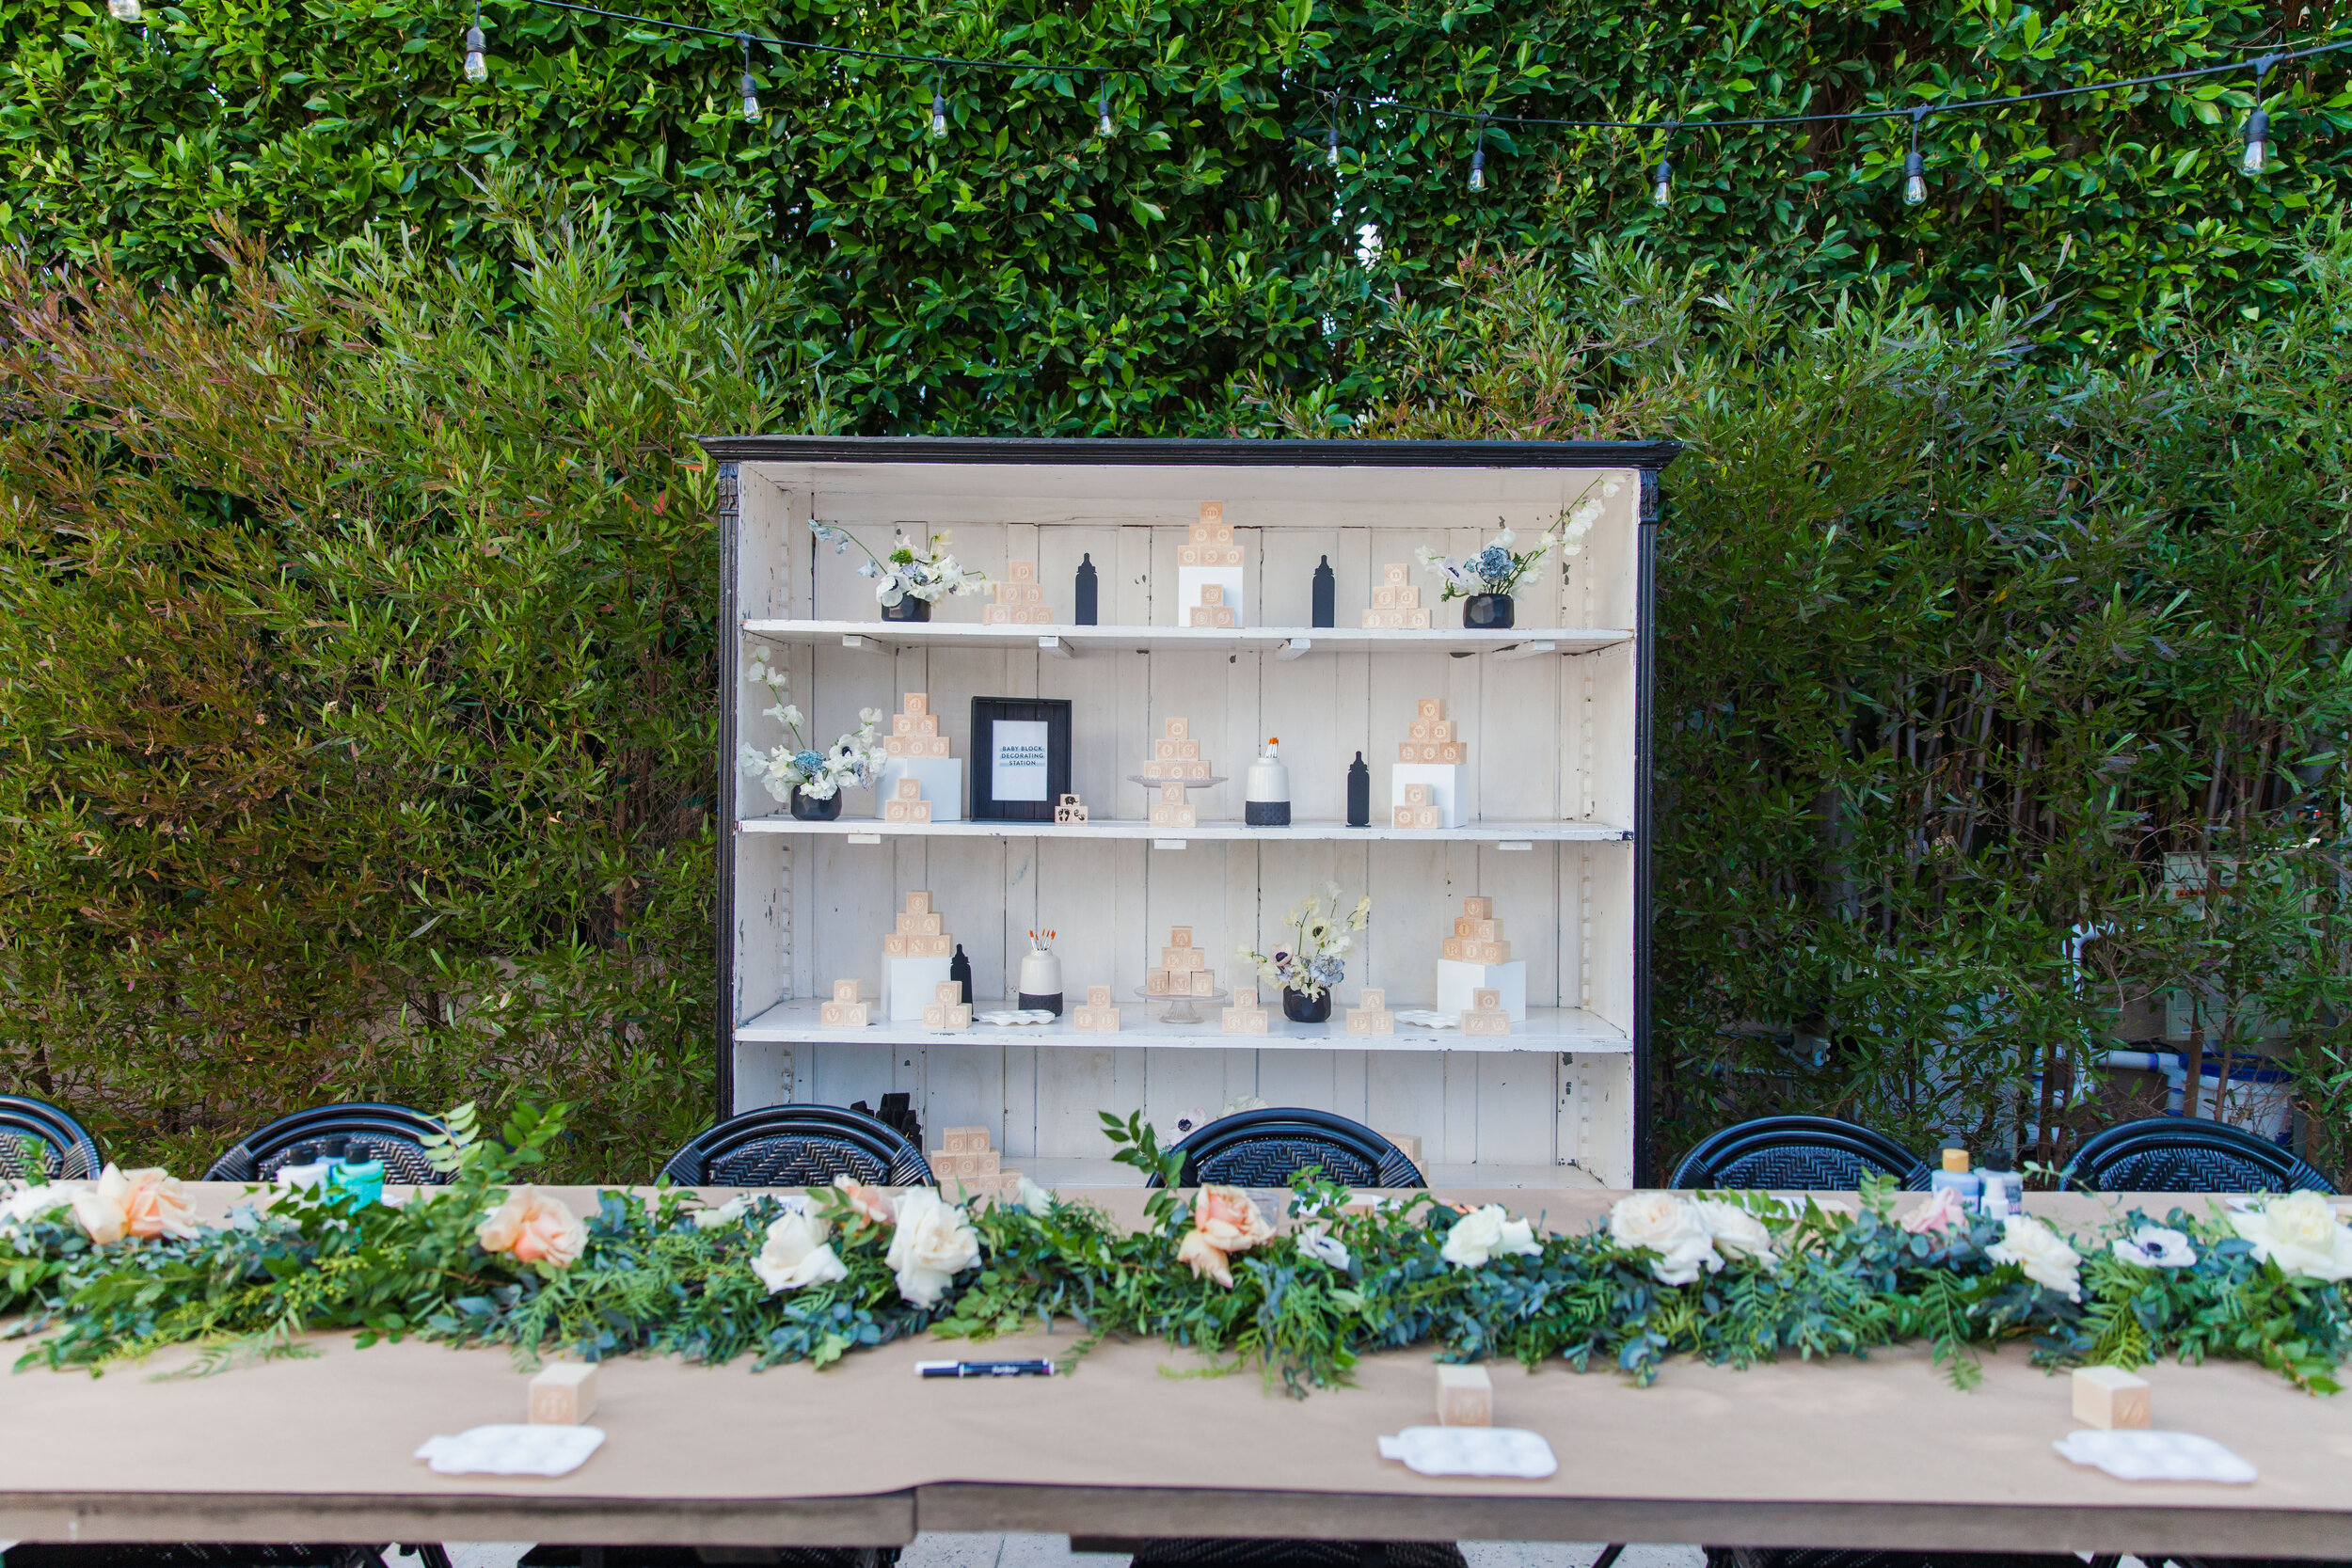 This luxury baby shower had a clever baby shower theme "Shit Just Got Real" - Click to see the LA event vendors that brought this bold luxury baby shower to life, including California event videographer The Siren & Co 